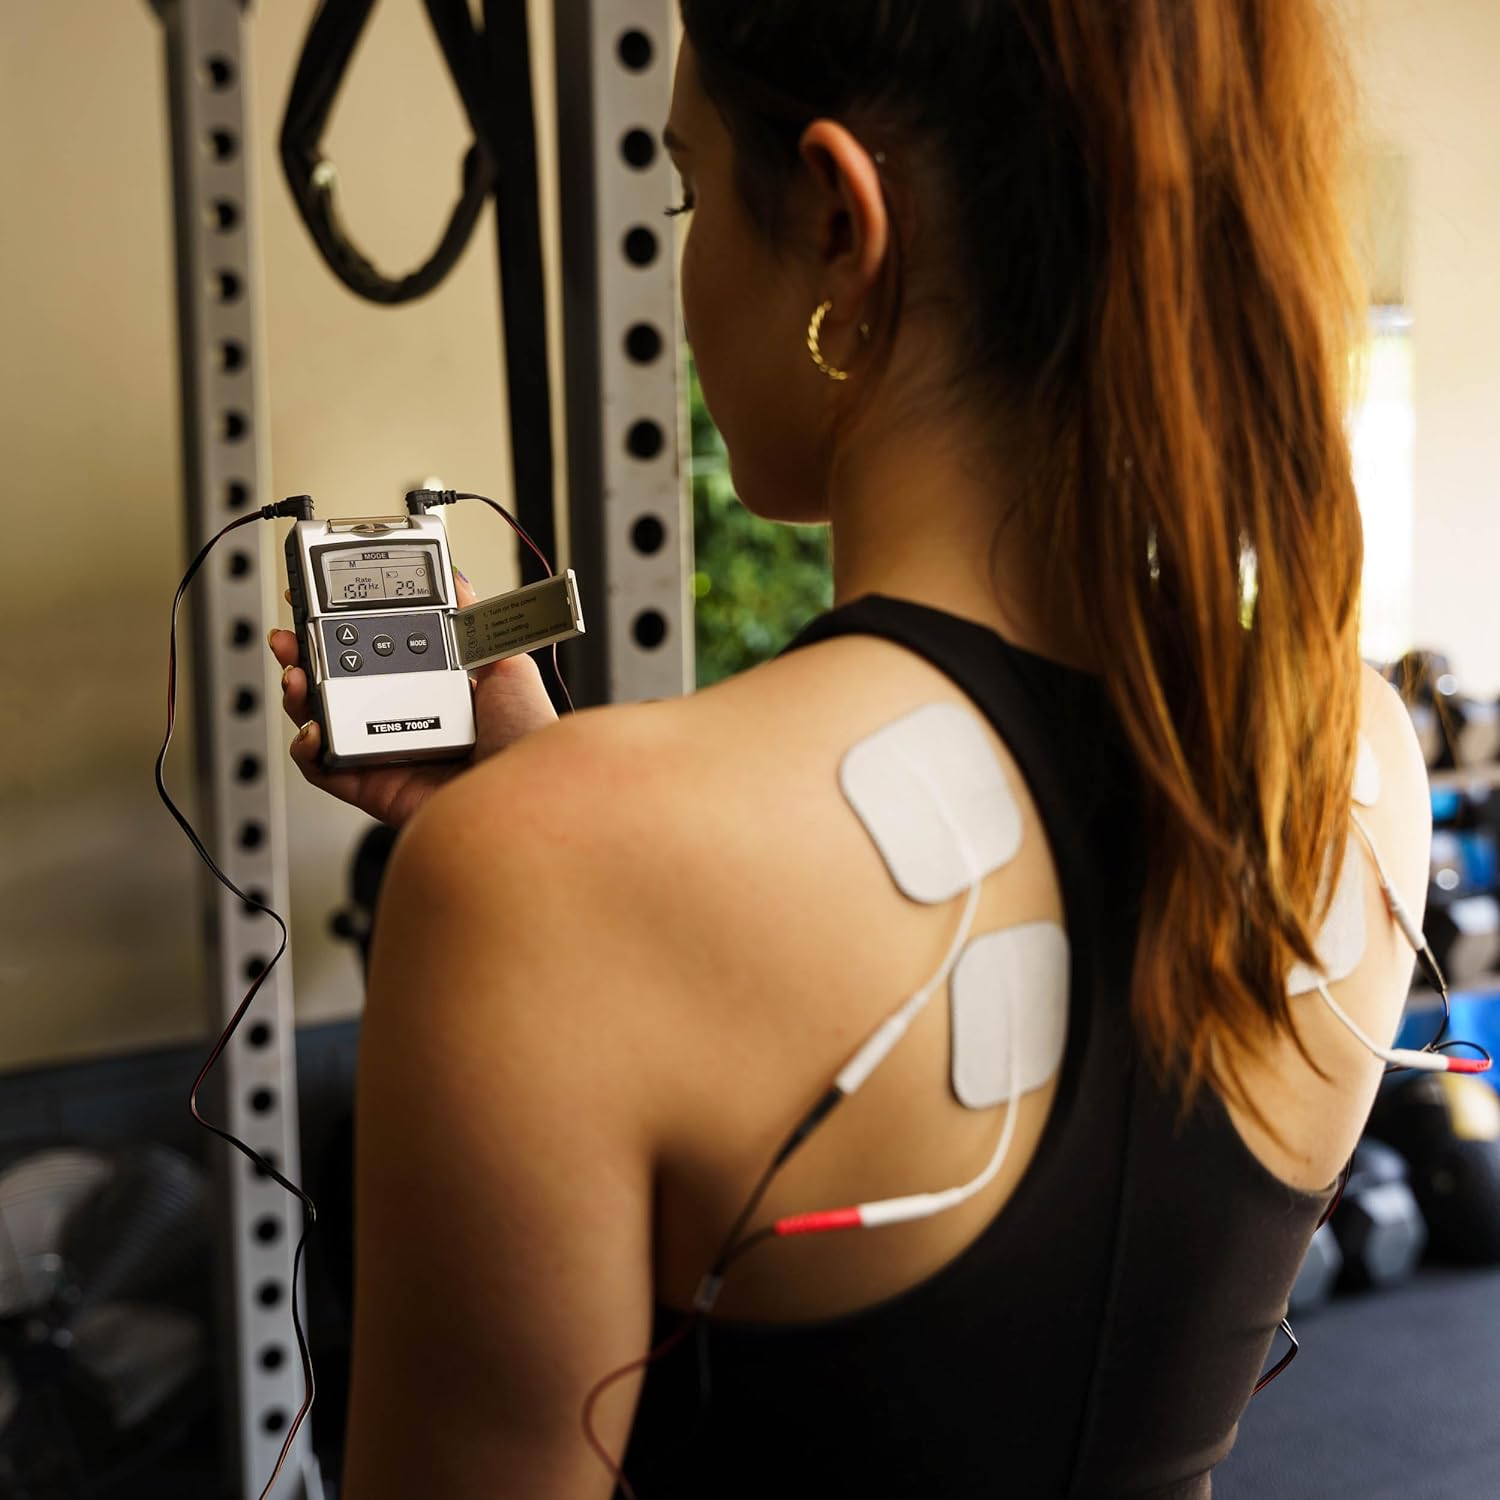 A woman in a gym holding a TENS unit with electrodes on her back